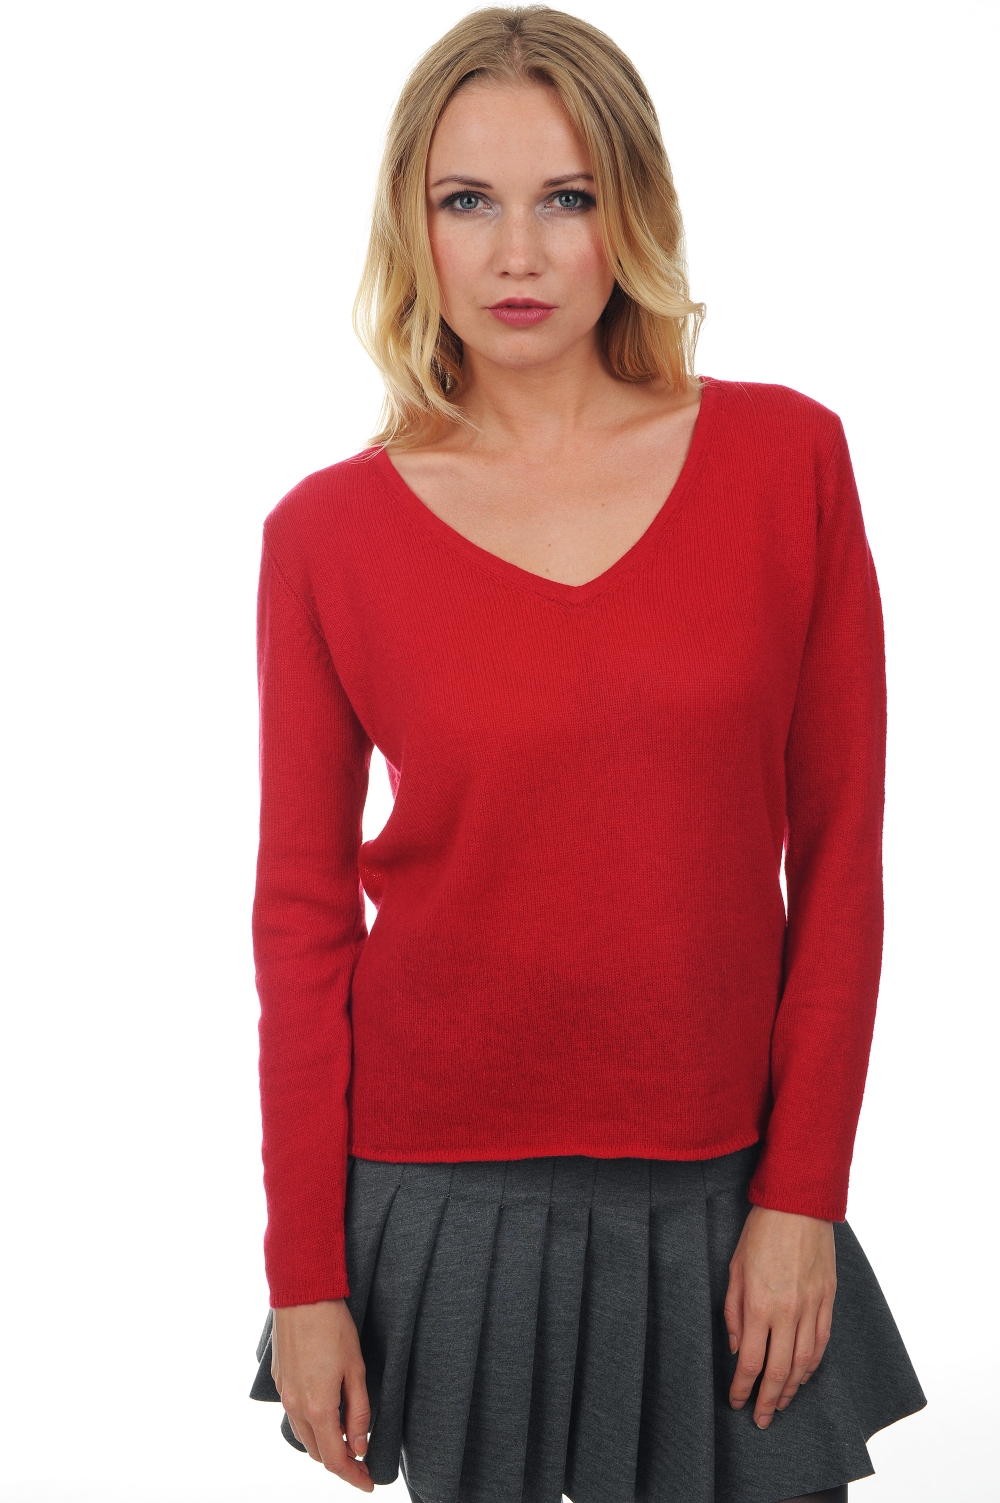 Cashmere ladies basic sweaters at low prices flavie blood red s